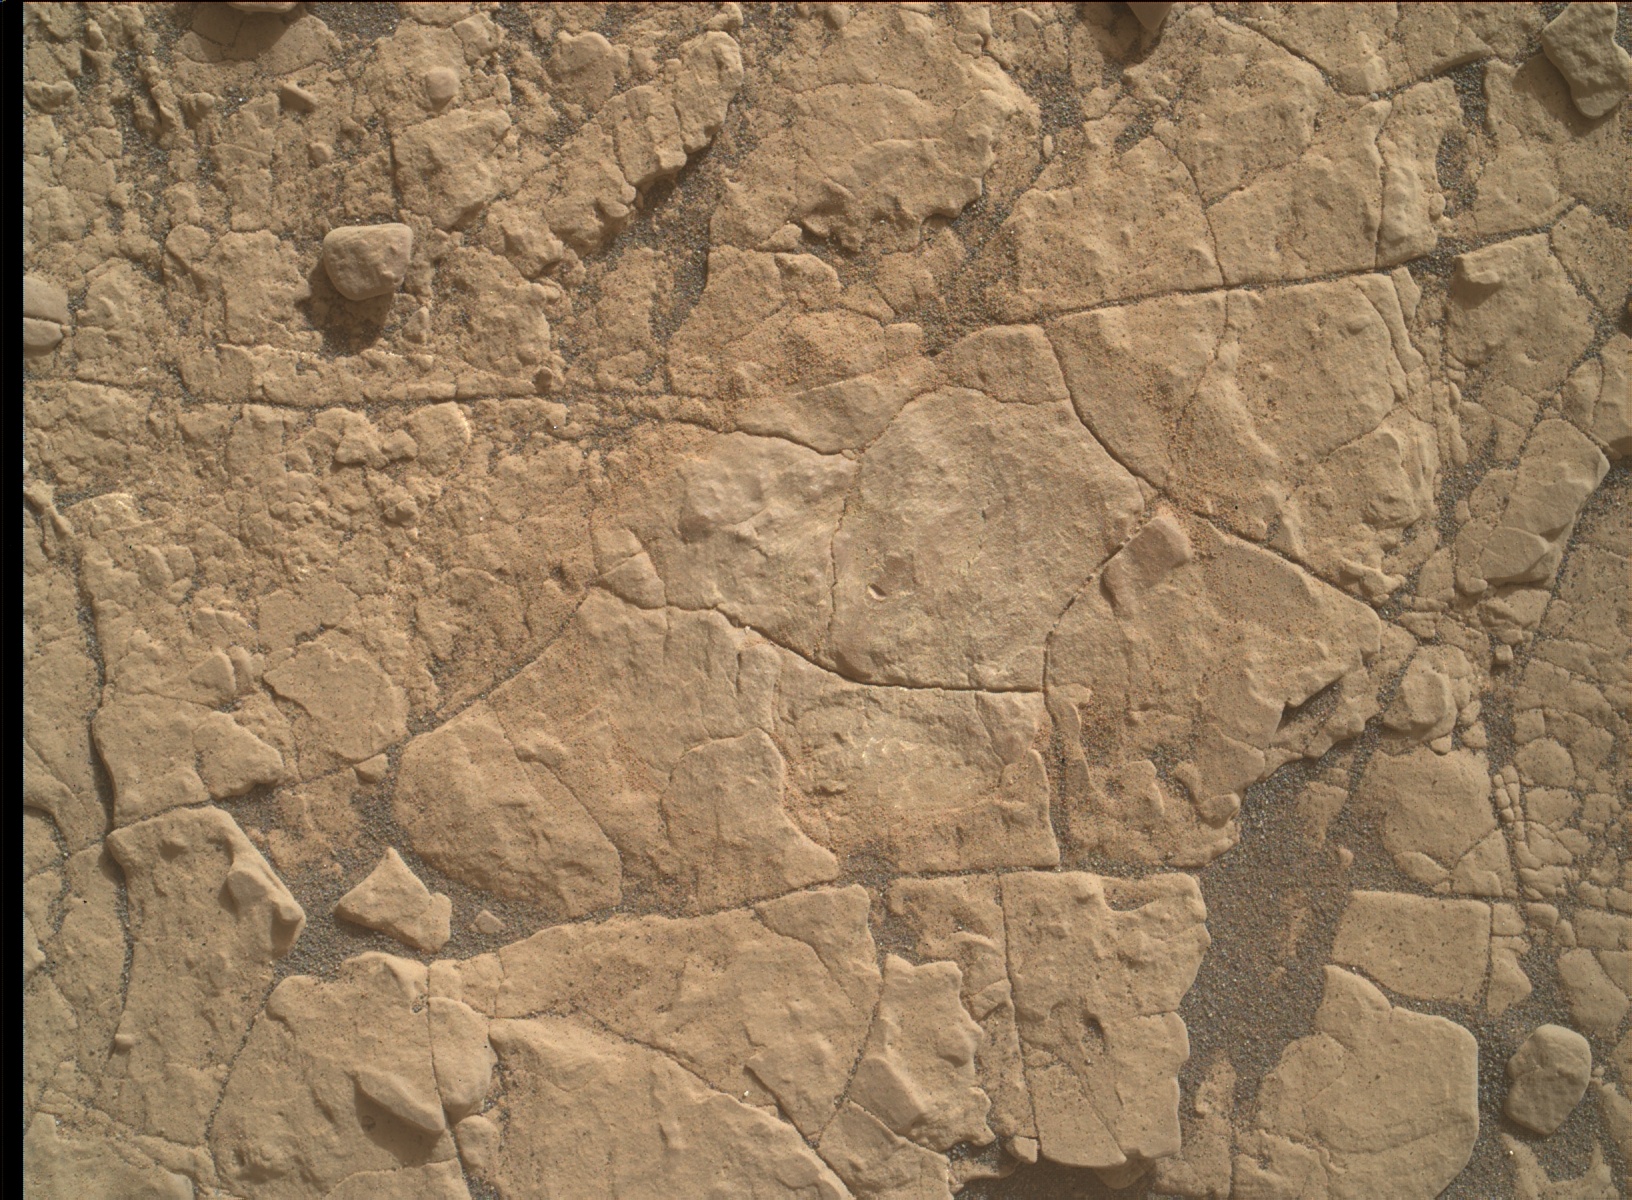 Nasa's Mars rover Curiosity acquired this image using its Mars Hand Lens Imager (MAHLI) on Sol 2415